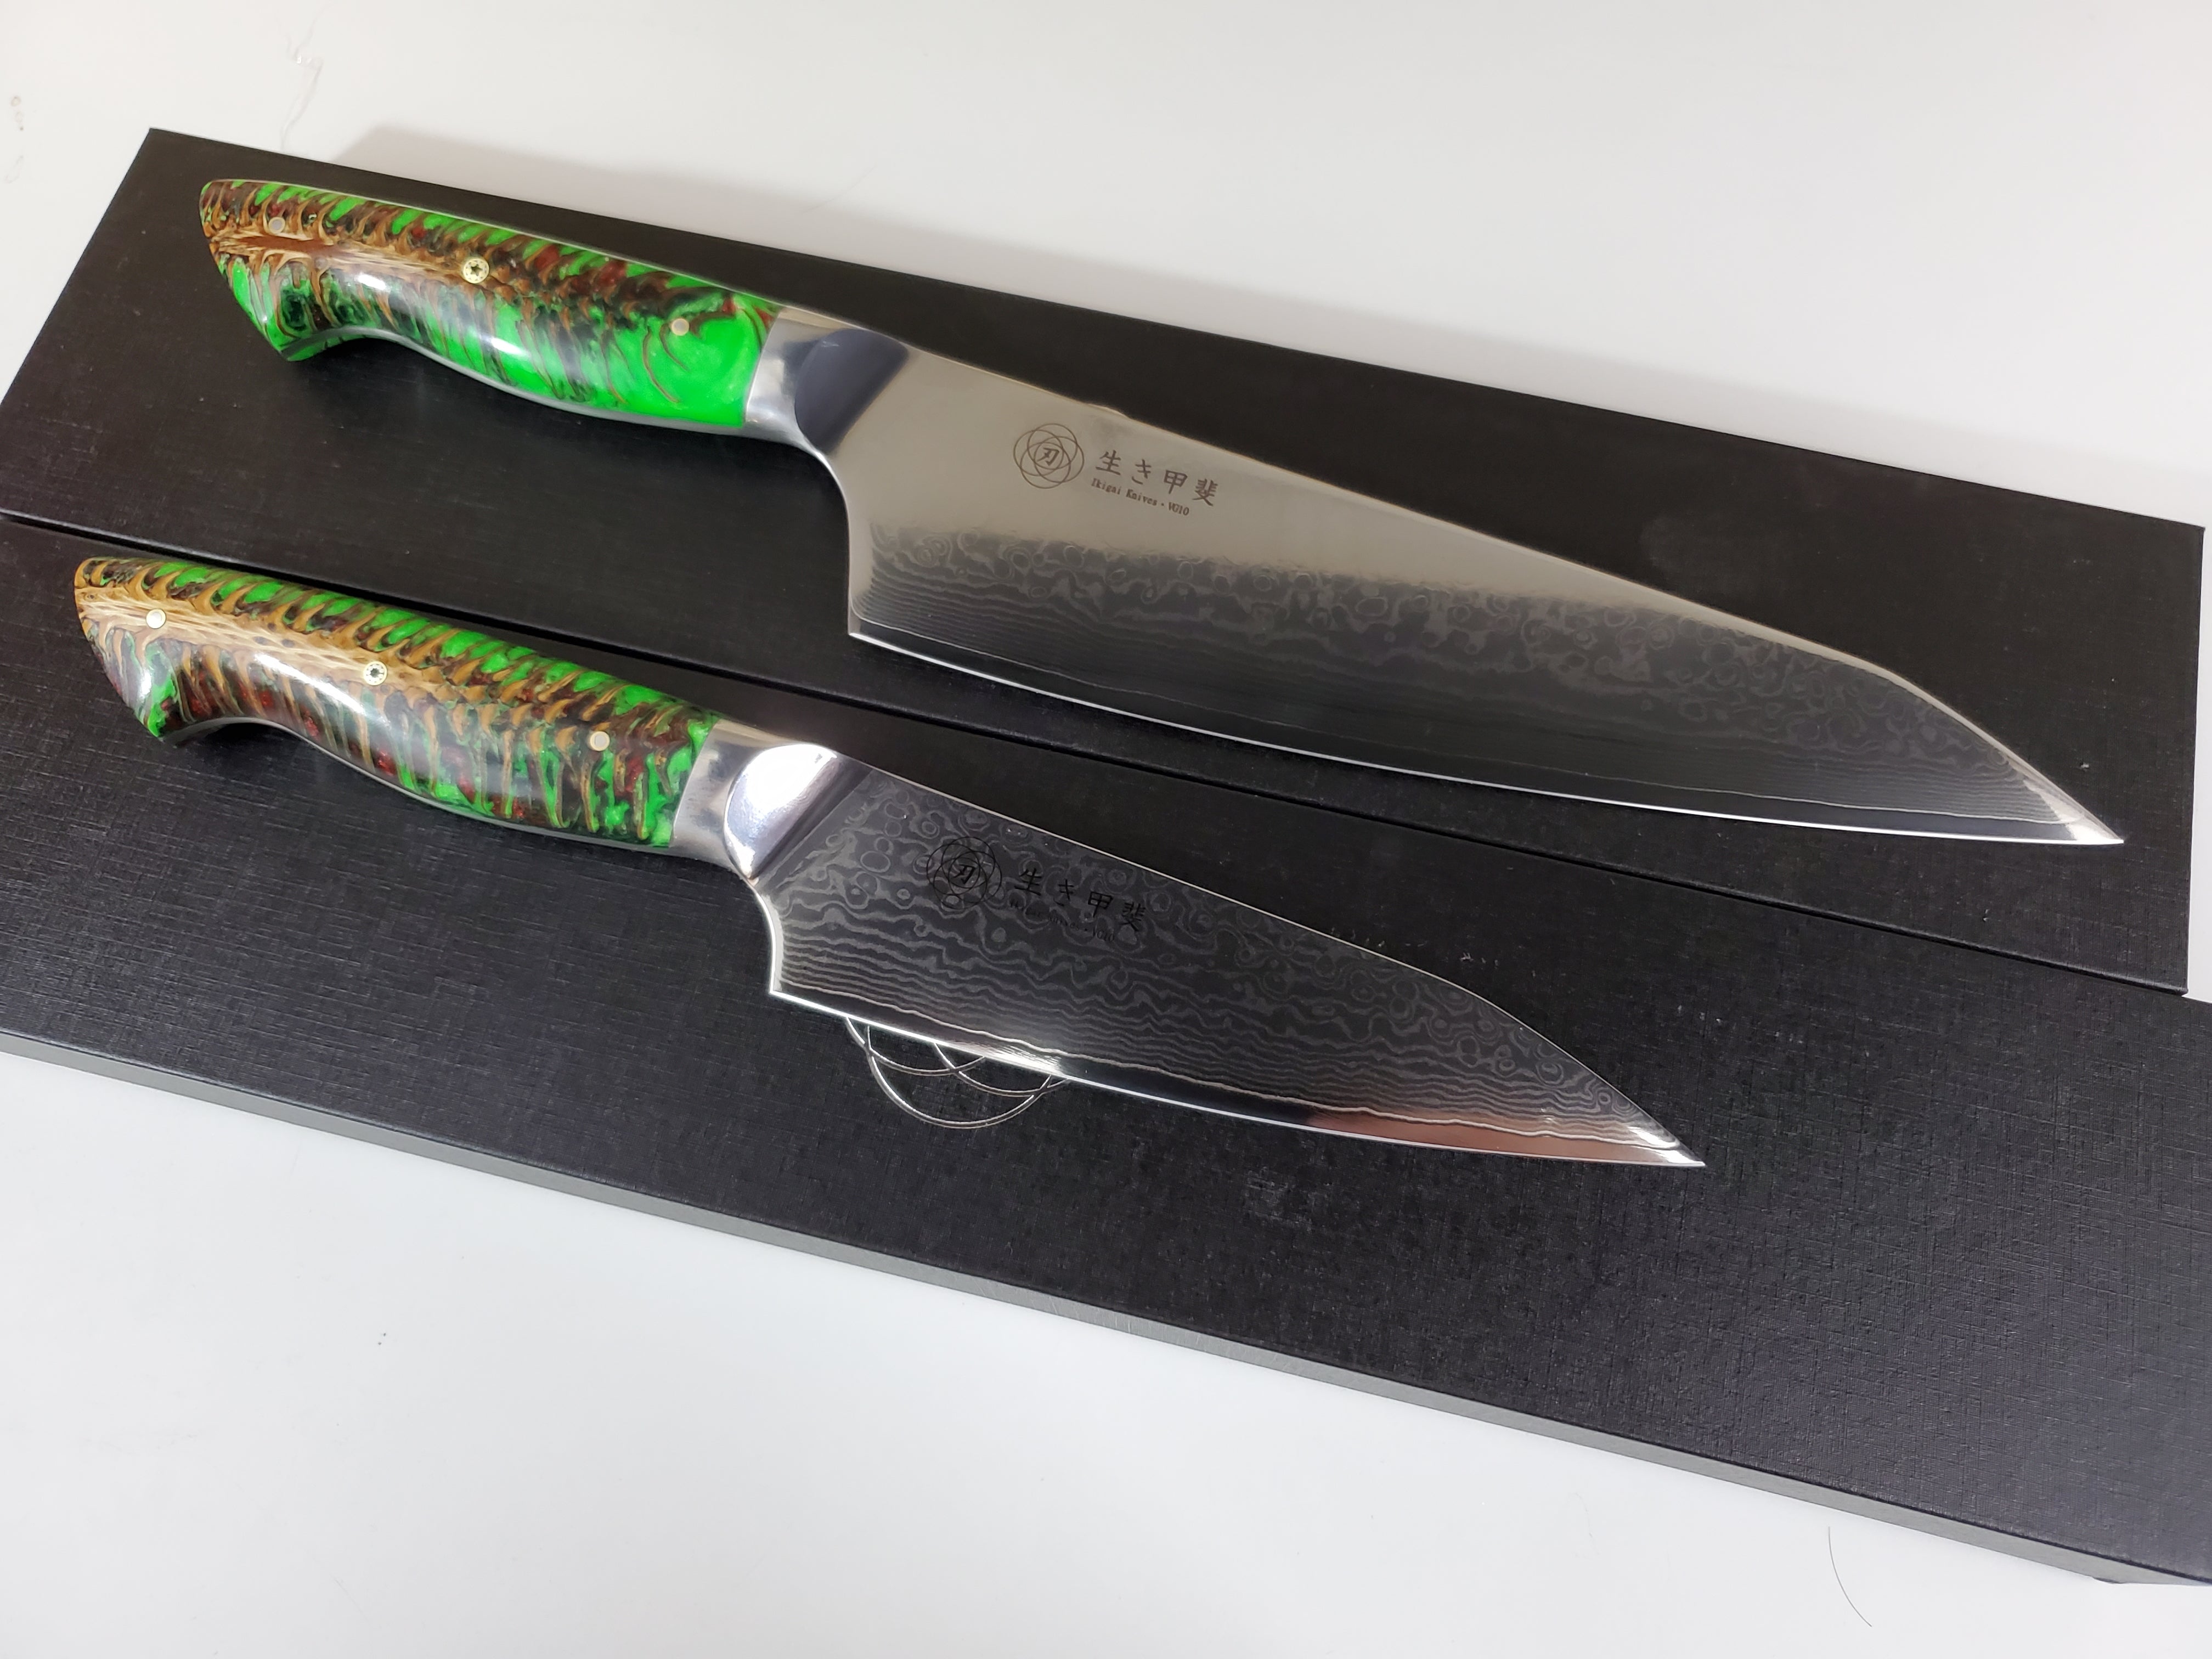 VG10 Damascus Chef knife set- 2pc 6" and 9"